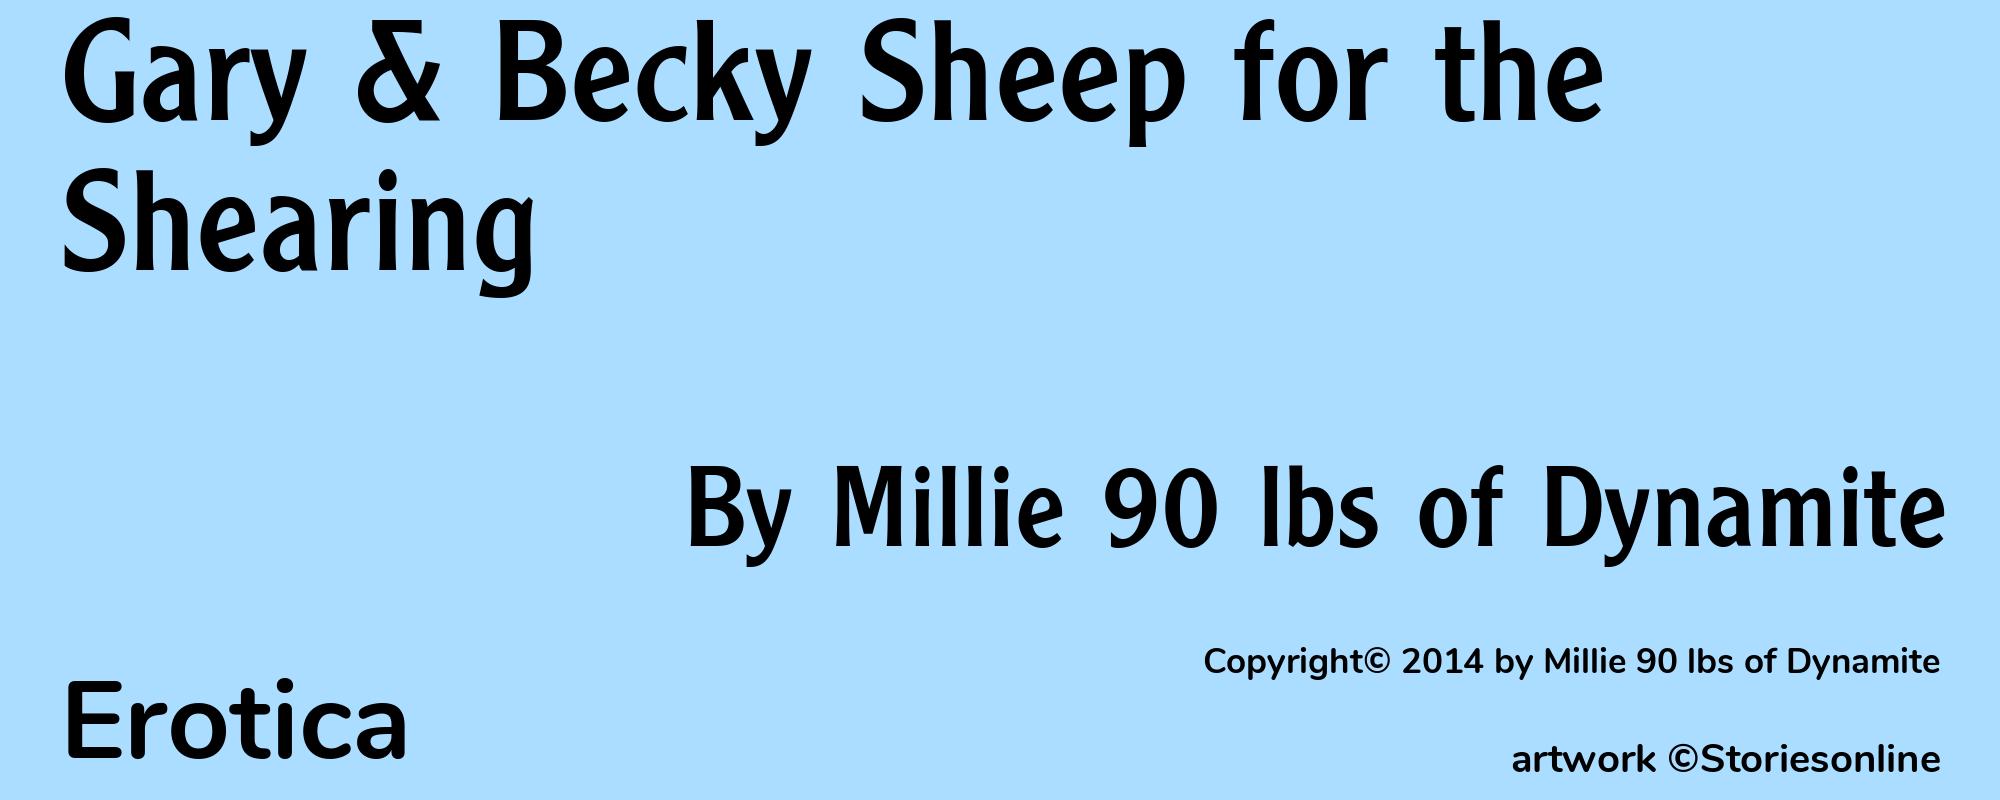 Gary & Becky Sheep for the Shearing - Cover